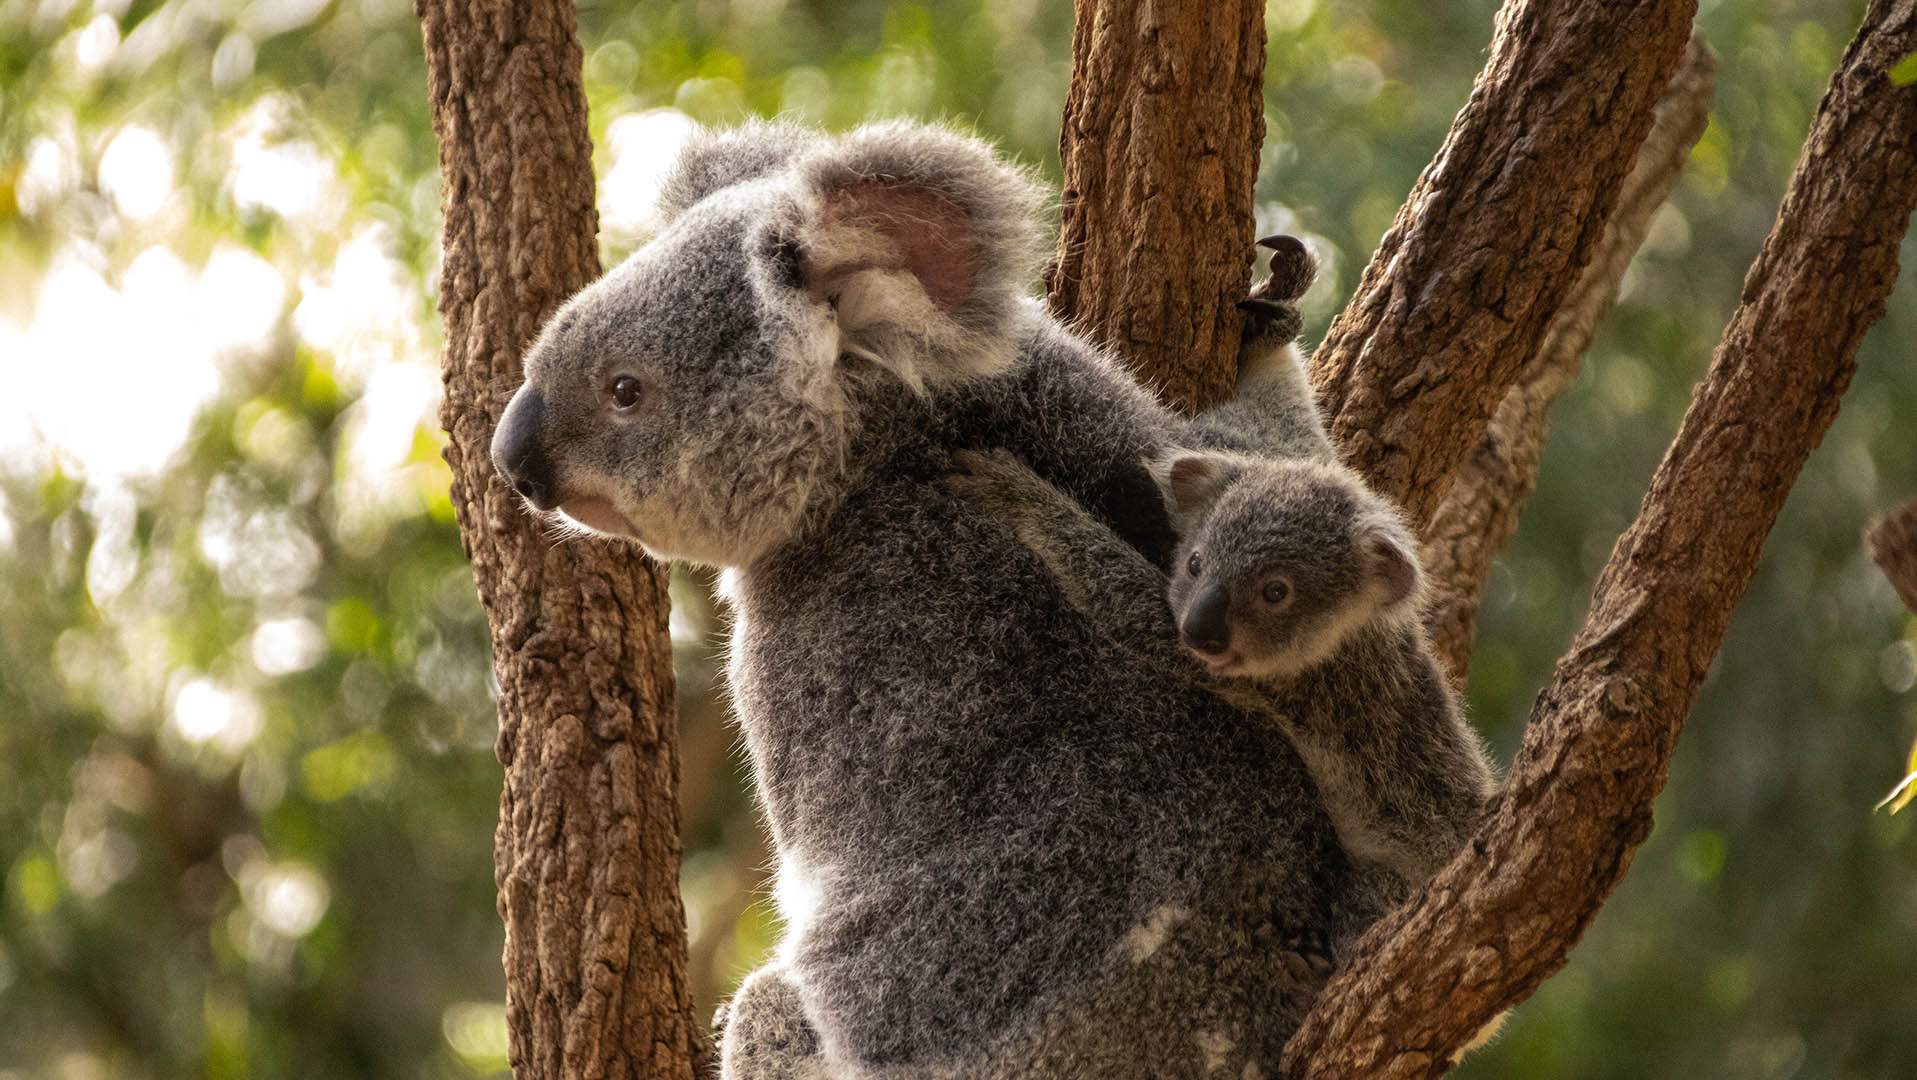 You Can No Longer Cuddle a Koala at Brisbane's Lone Pine Koala Sanctuary — But a New Close-Up Experience Is Coming